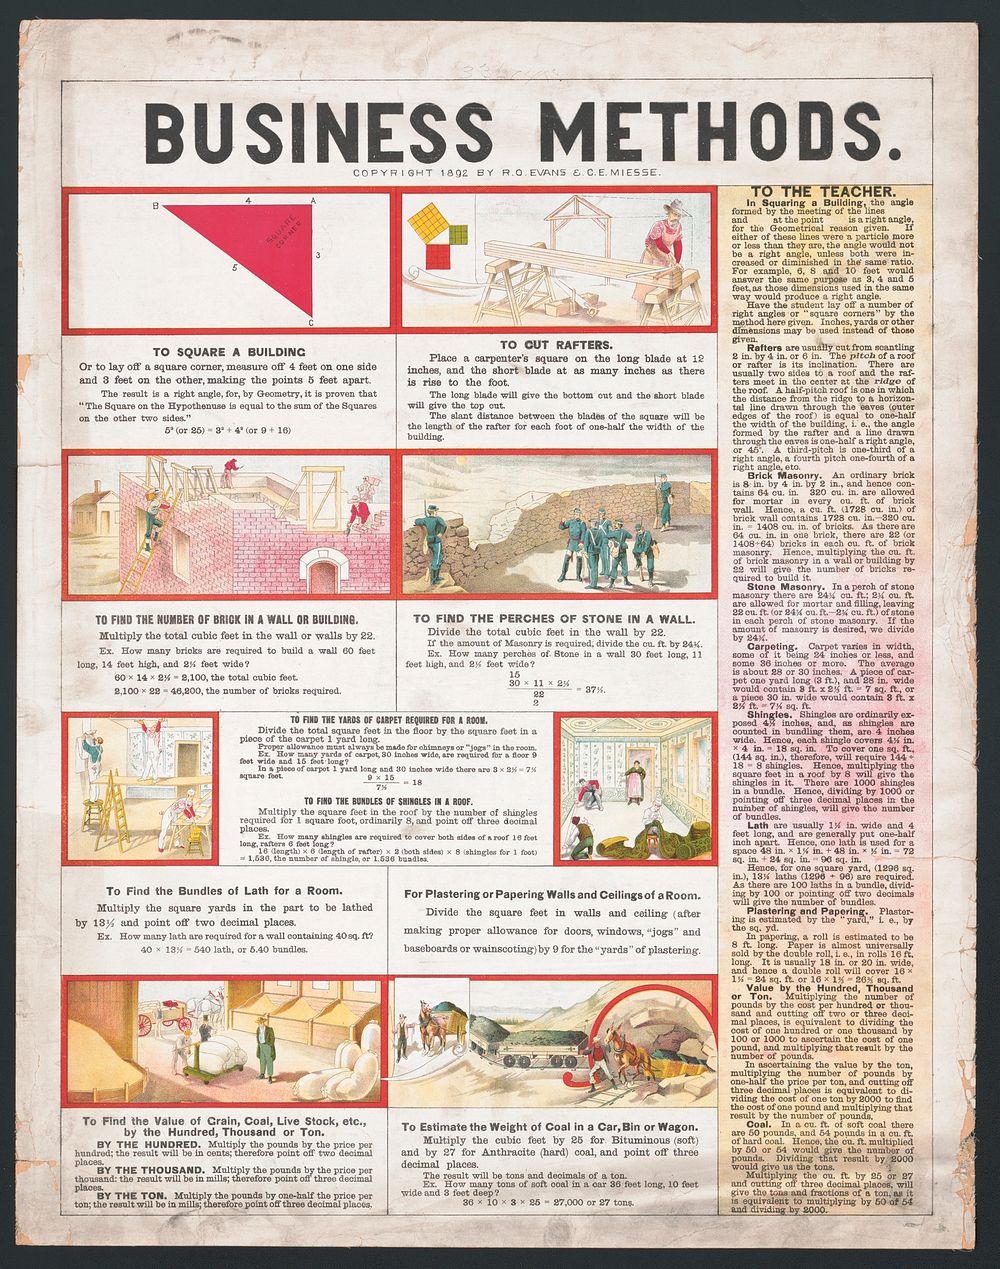 Business methods, [United States] : [publisher not transcribed], 1892.